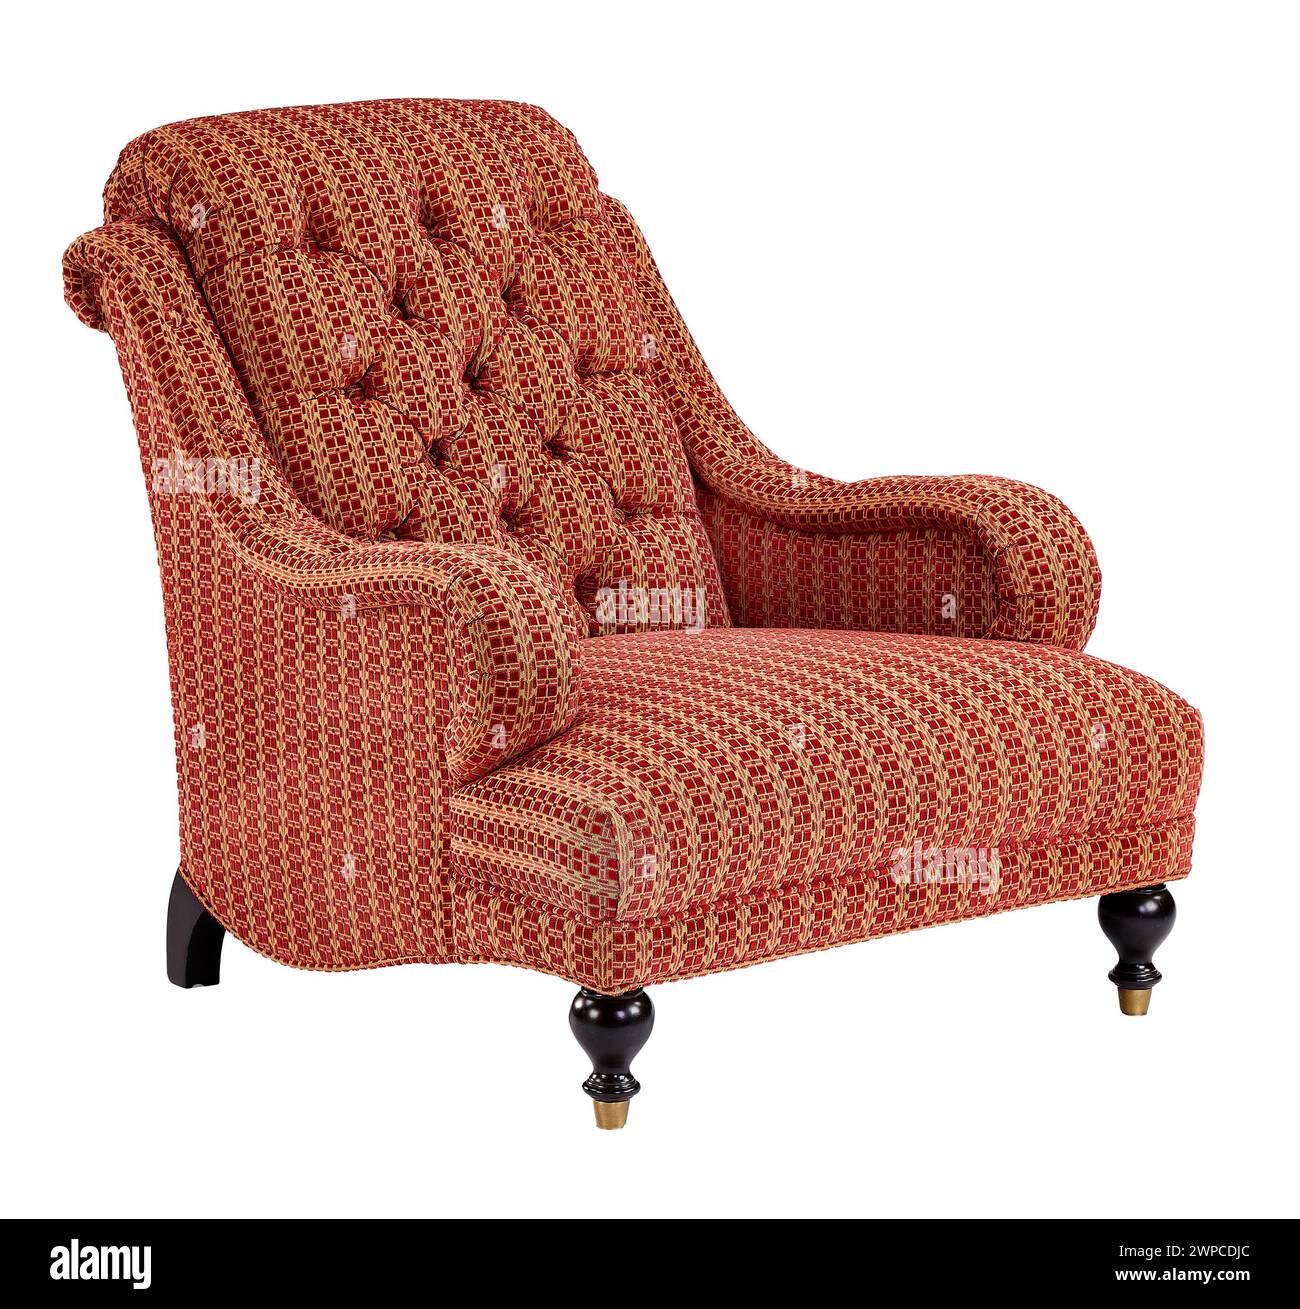 Upholstered arm chair red and gold stripes with clipping path. Stock Photo